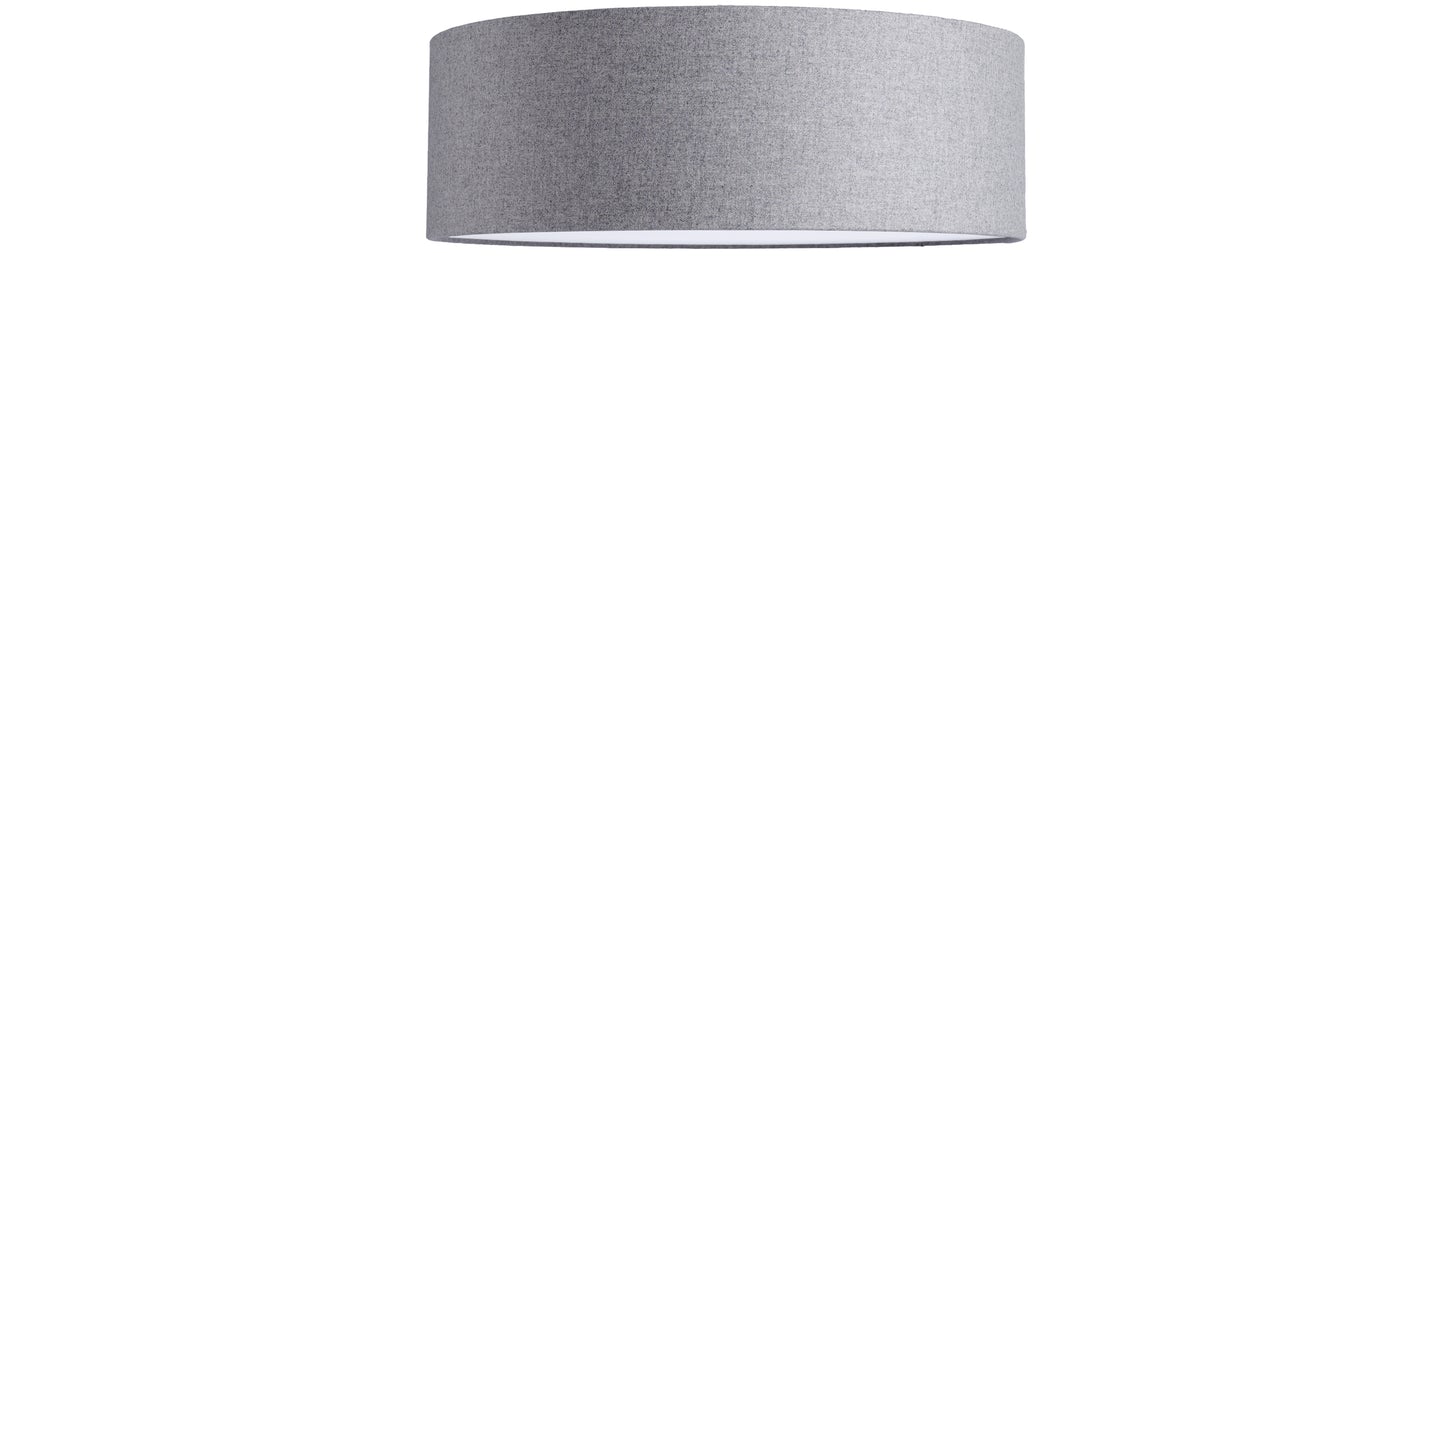 Discus 35 ceiling light loden grey